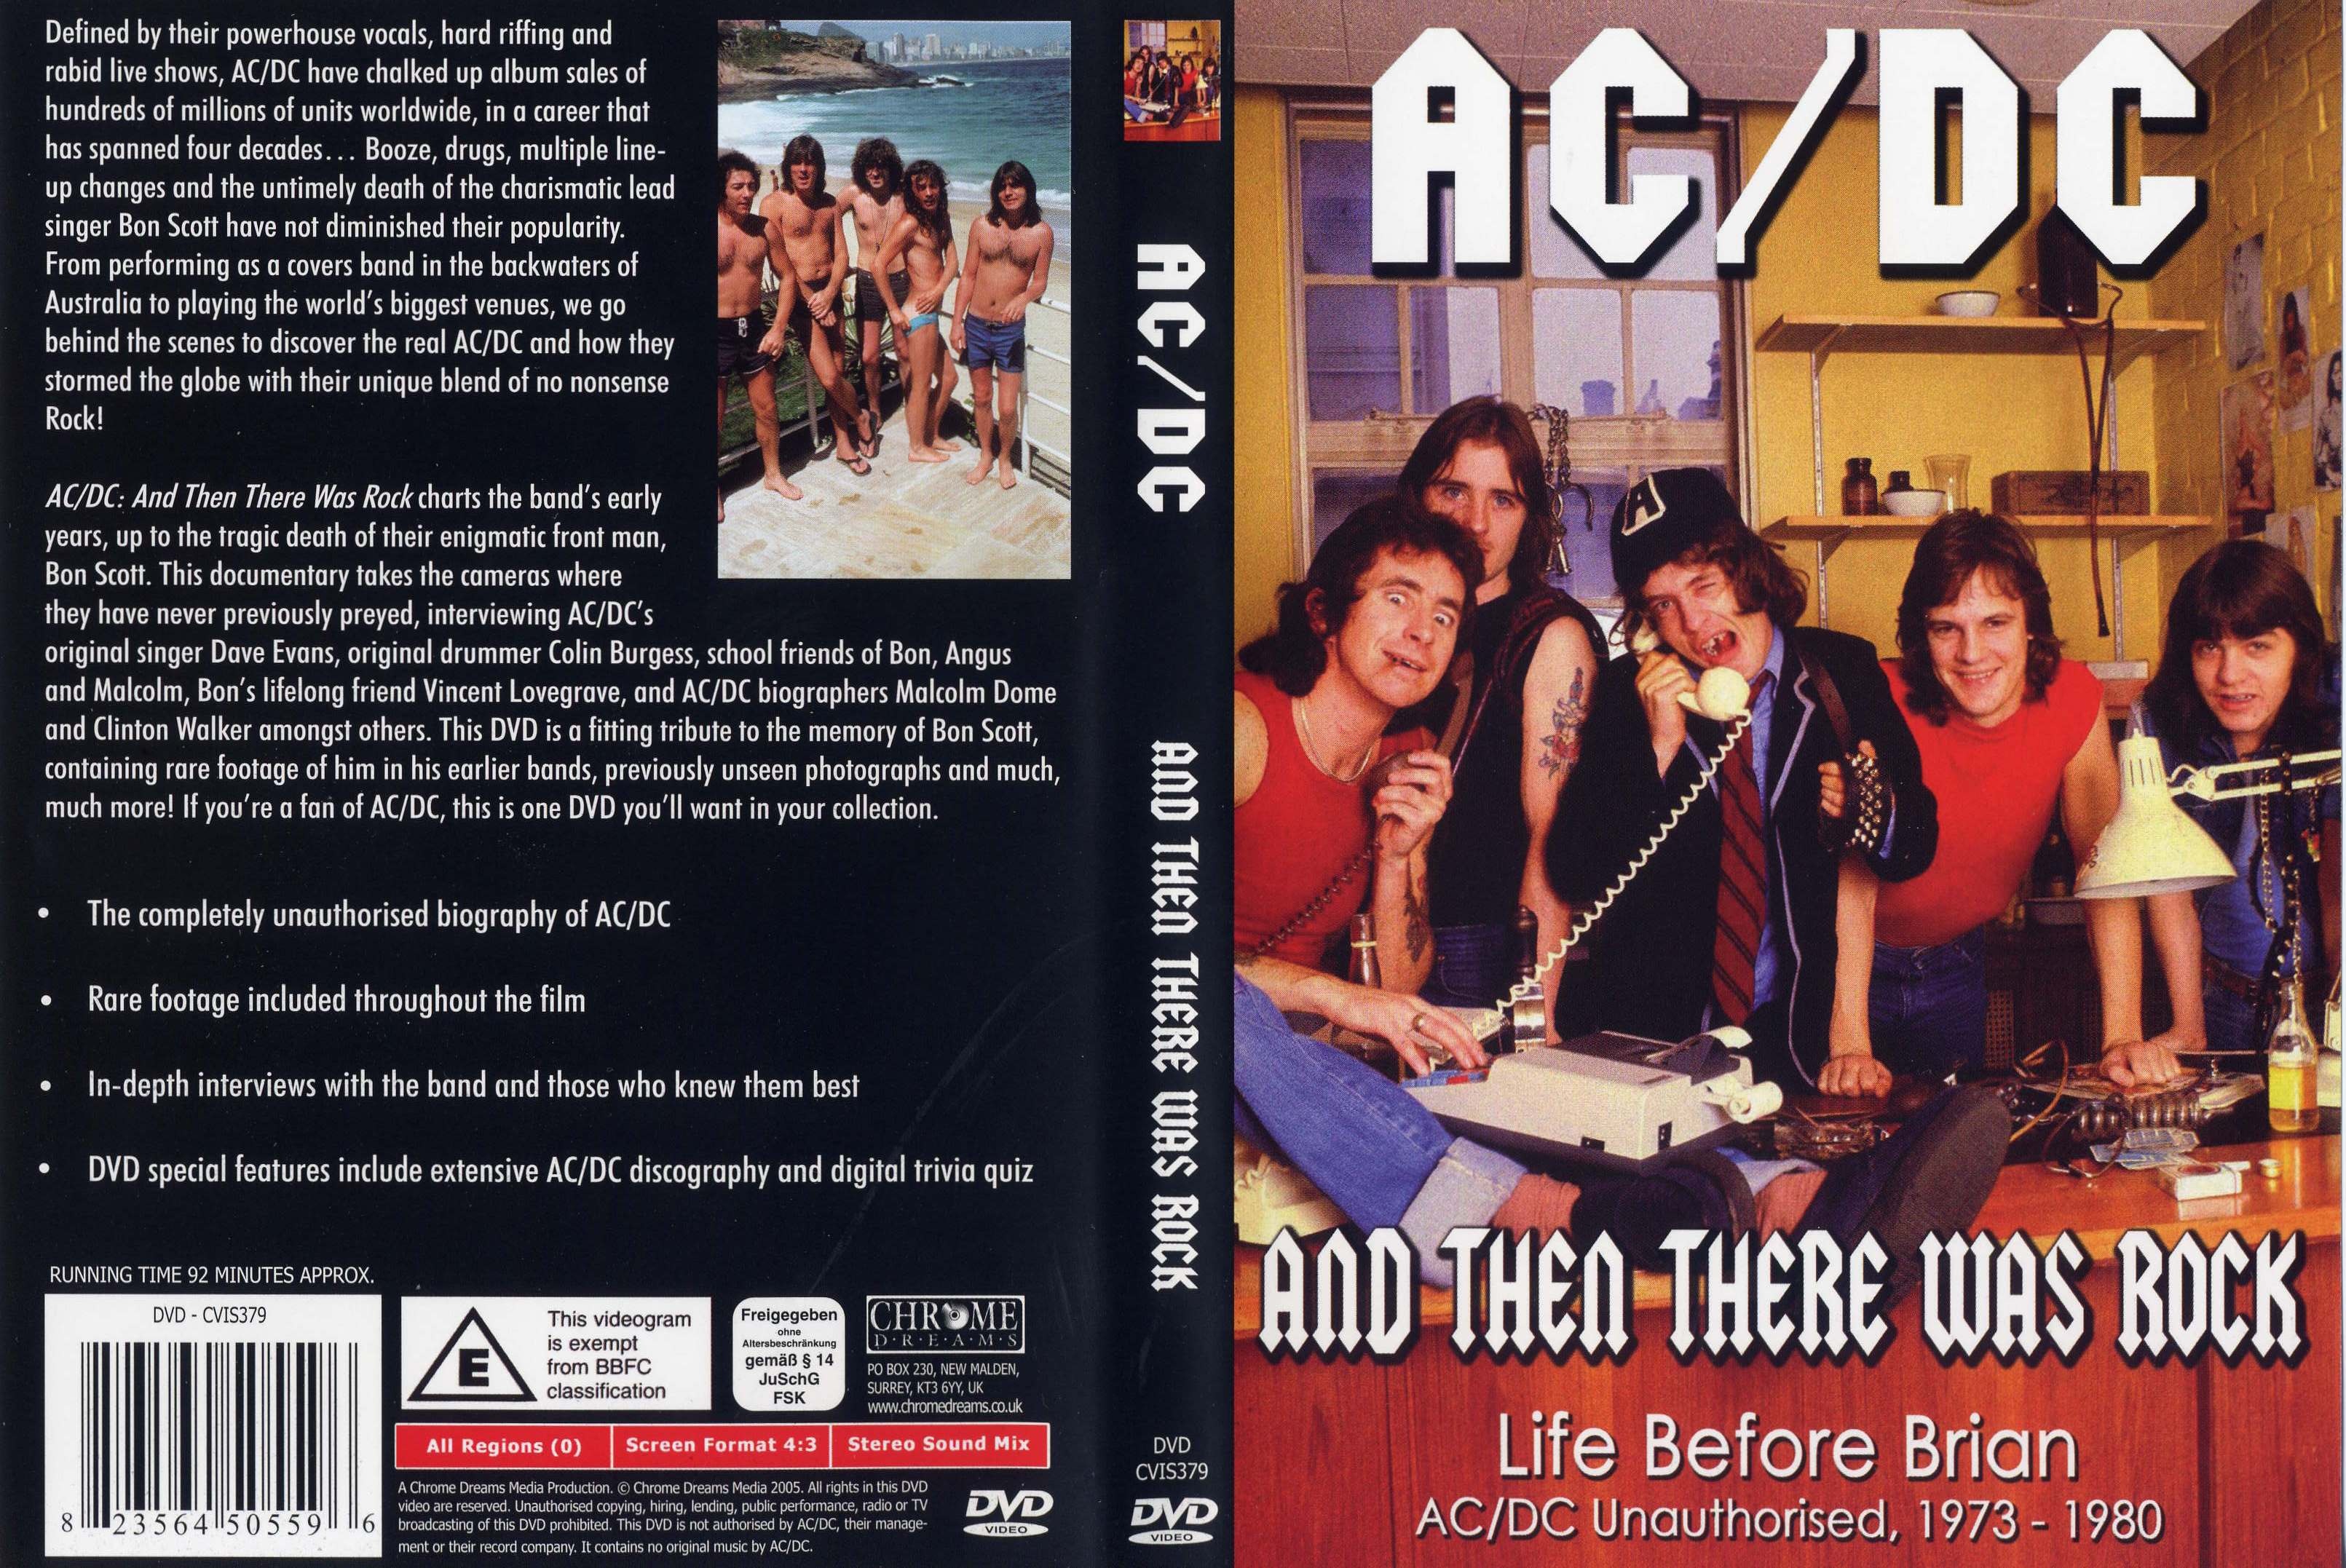 Jaquette DVD ACDC and there was rock